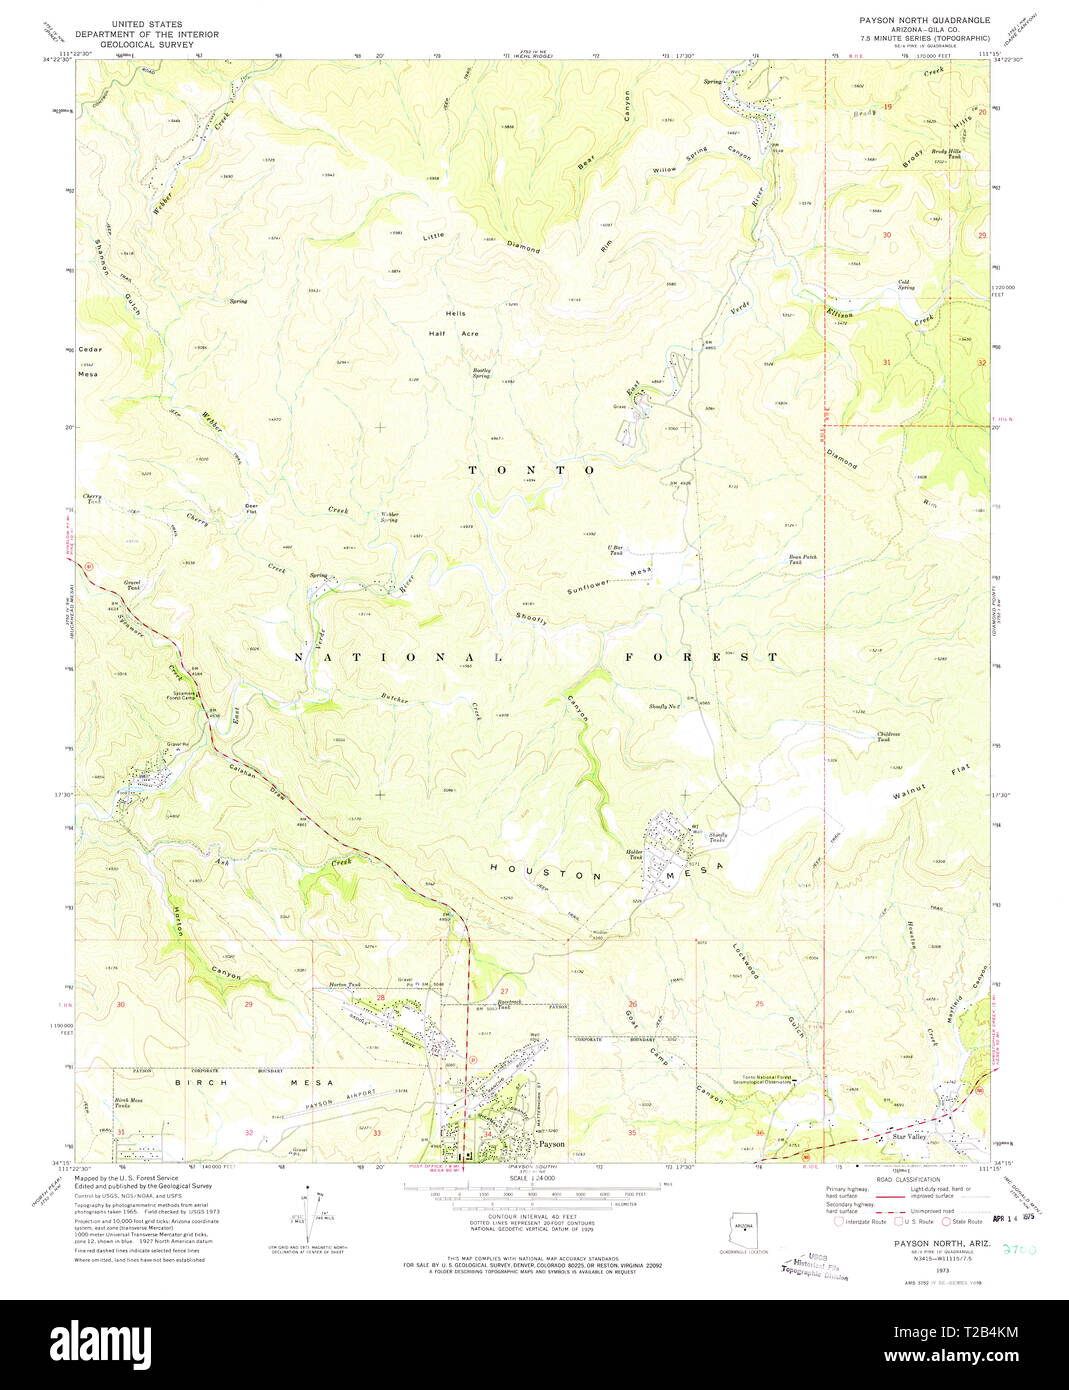 Payson Arizona Cut Out Stock Images And Pictures Alamy 6326